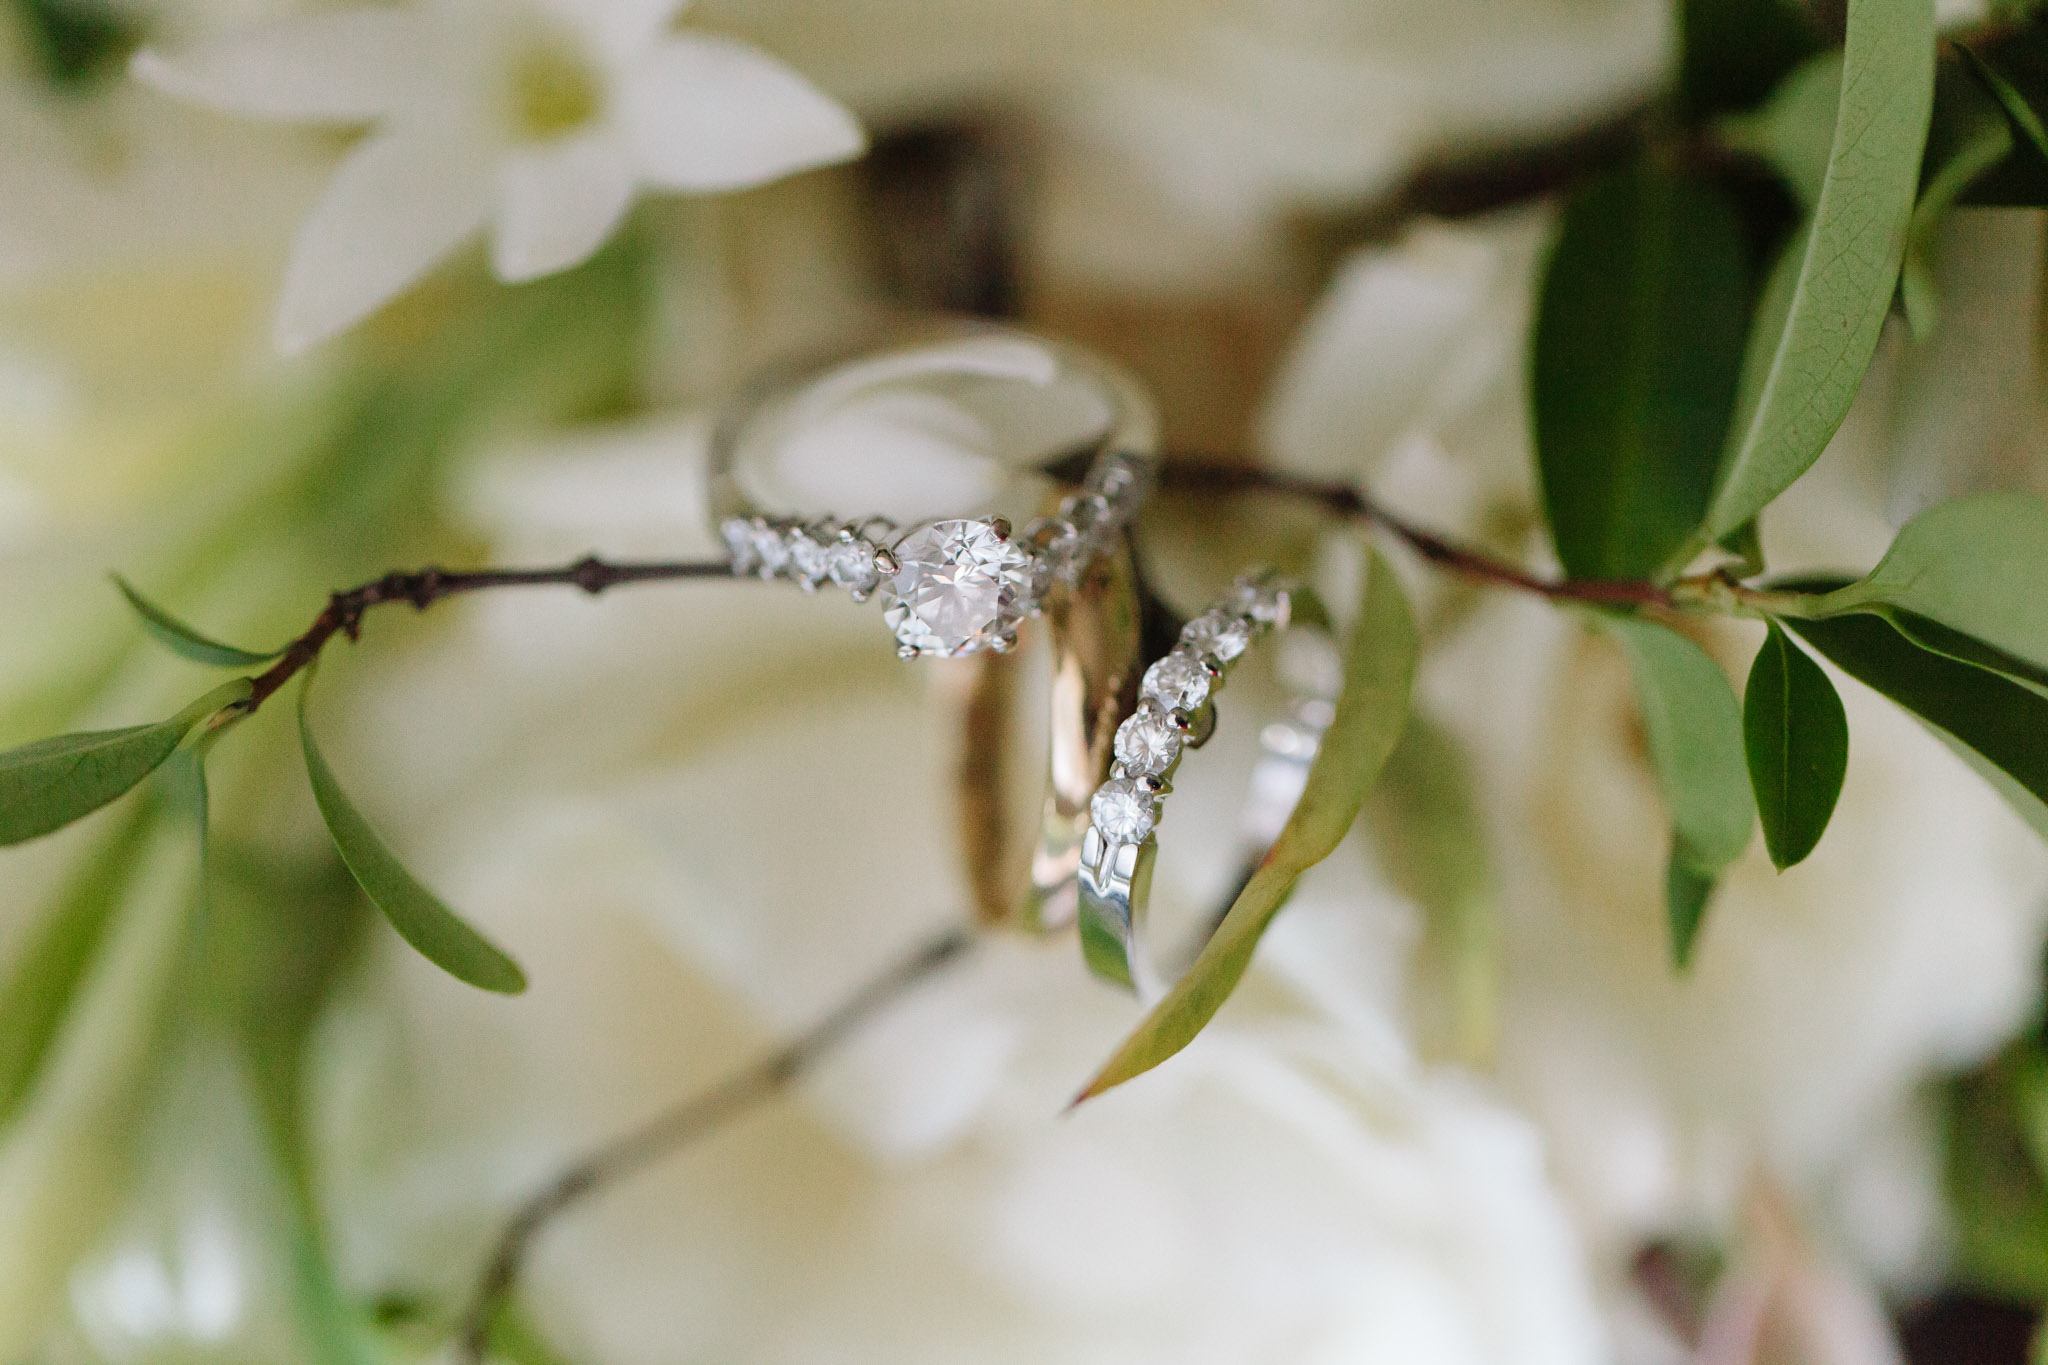 Summerour's top wedding photographer Rebecca Cerasani uses delicate florals to style a wedding ring shot.